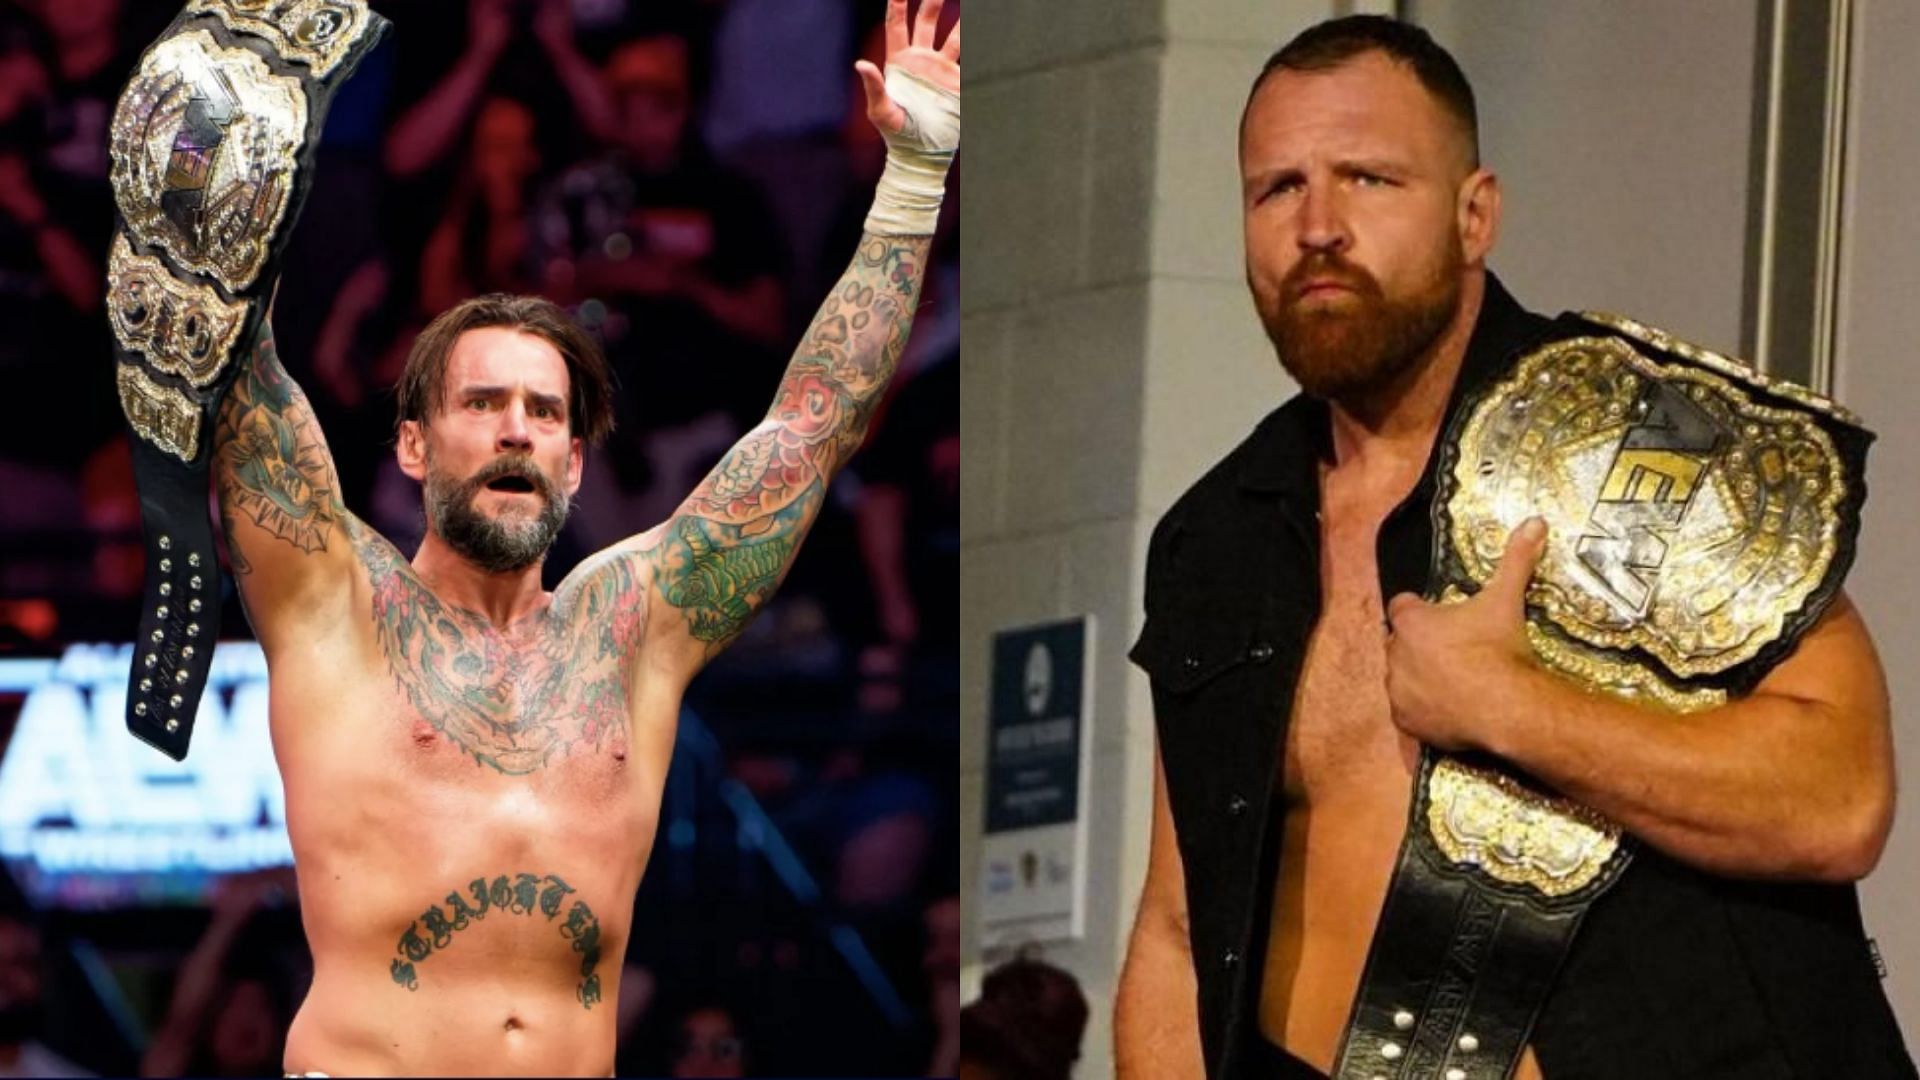 All roads point to CM Punk vs. Jon Moxley to unify the AEW World Championship